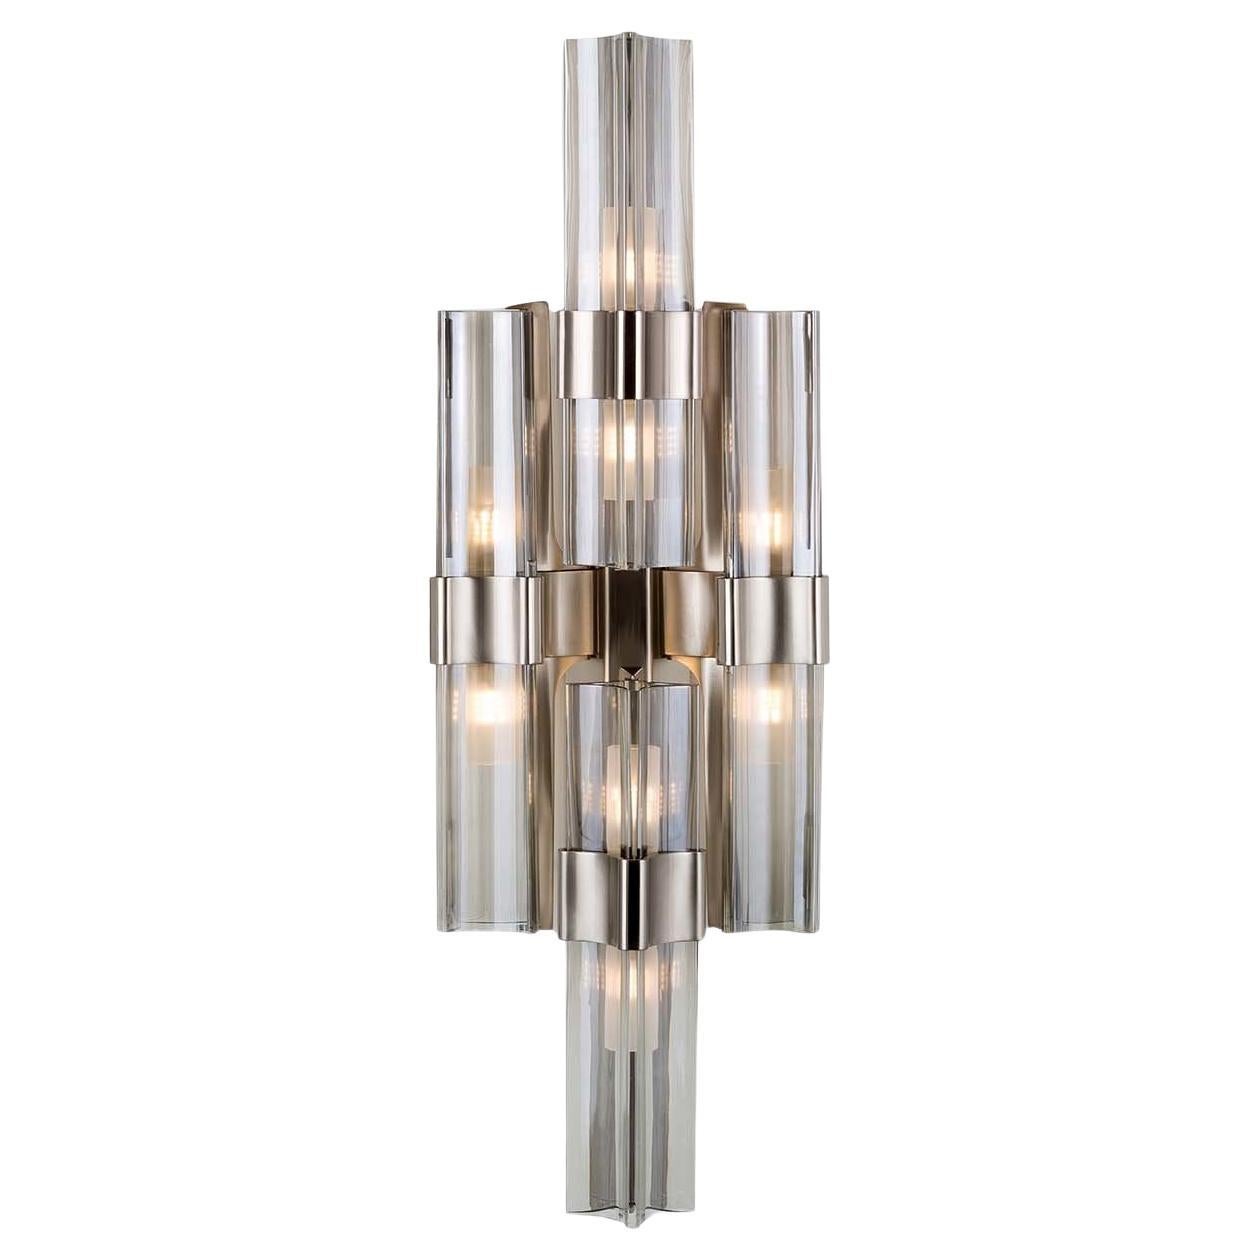 Eterea Wall Lamp Smoke Gray Crystal by Emanuela Benedetti